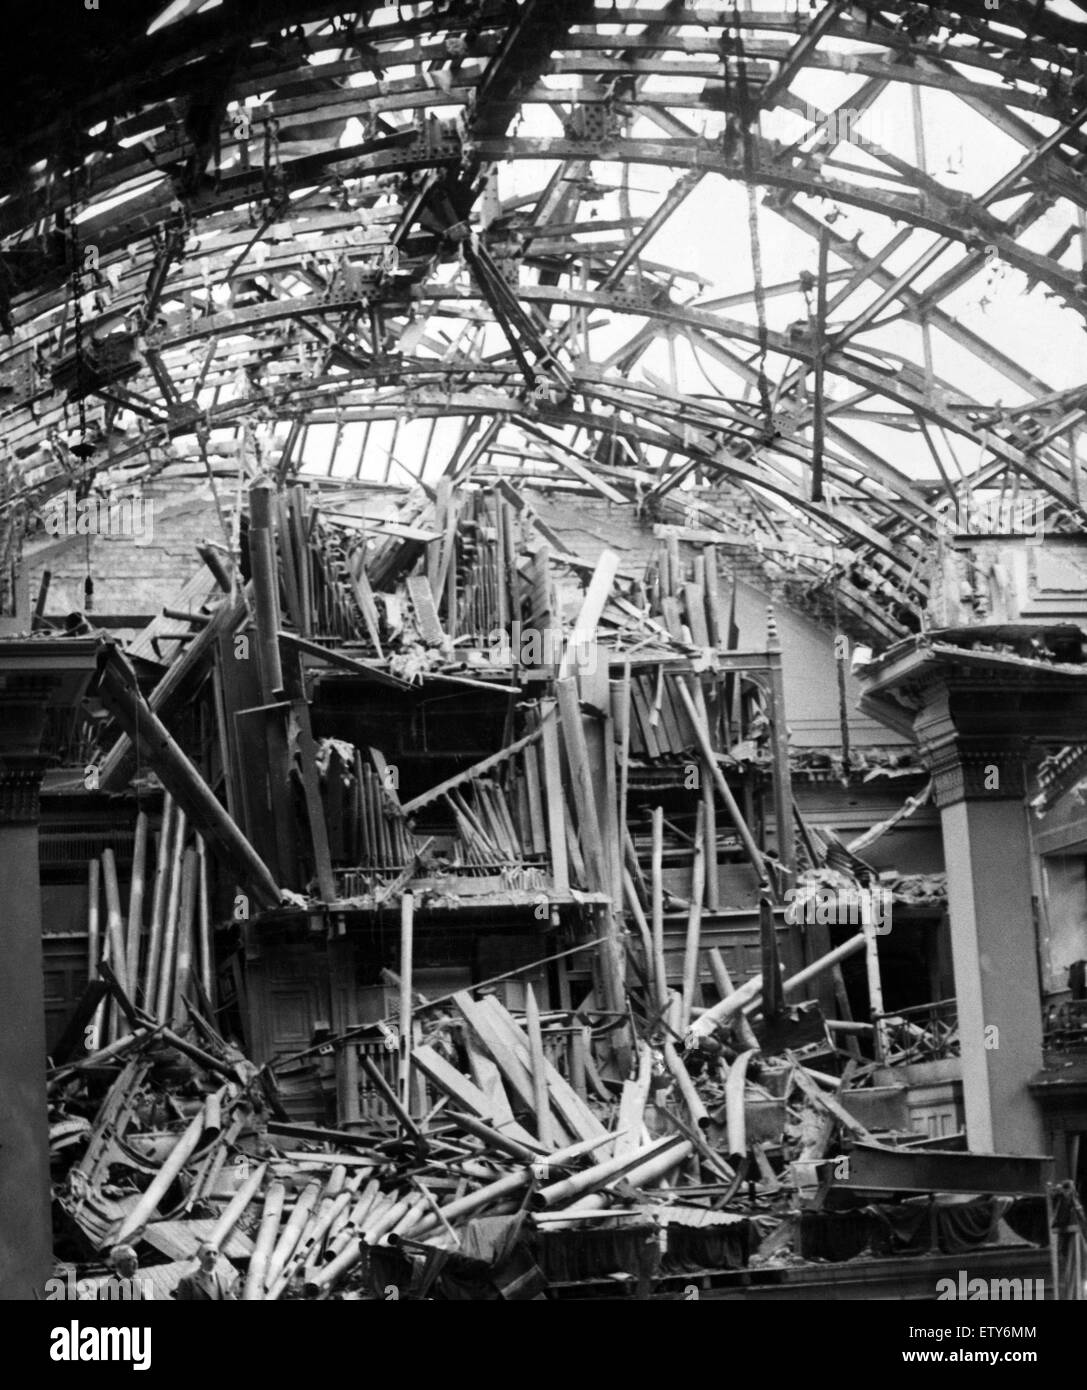 Second World War in Merseyside. The ruins of the organ in Wallasey Town Hall, which was damaged by a bomb during the air raids. No one was injured. 31st August 1940. Stock Photo